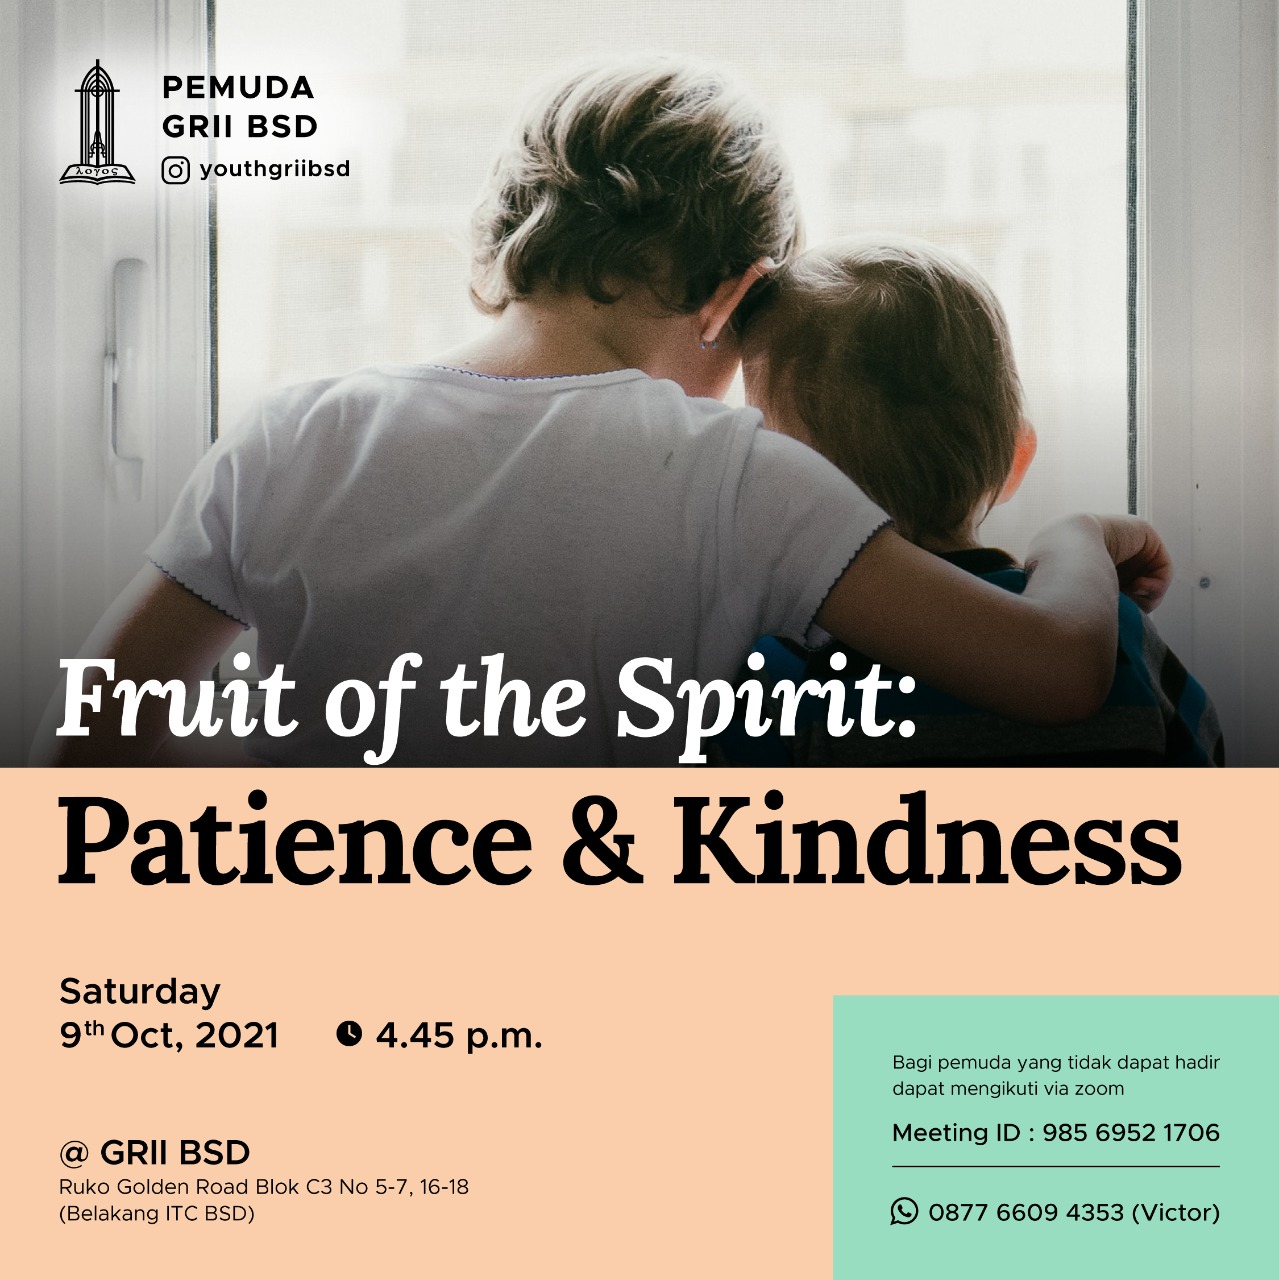 Fruit of the Spirit: Patience & Kindness